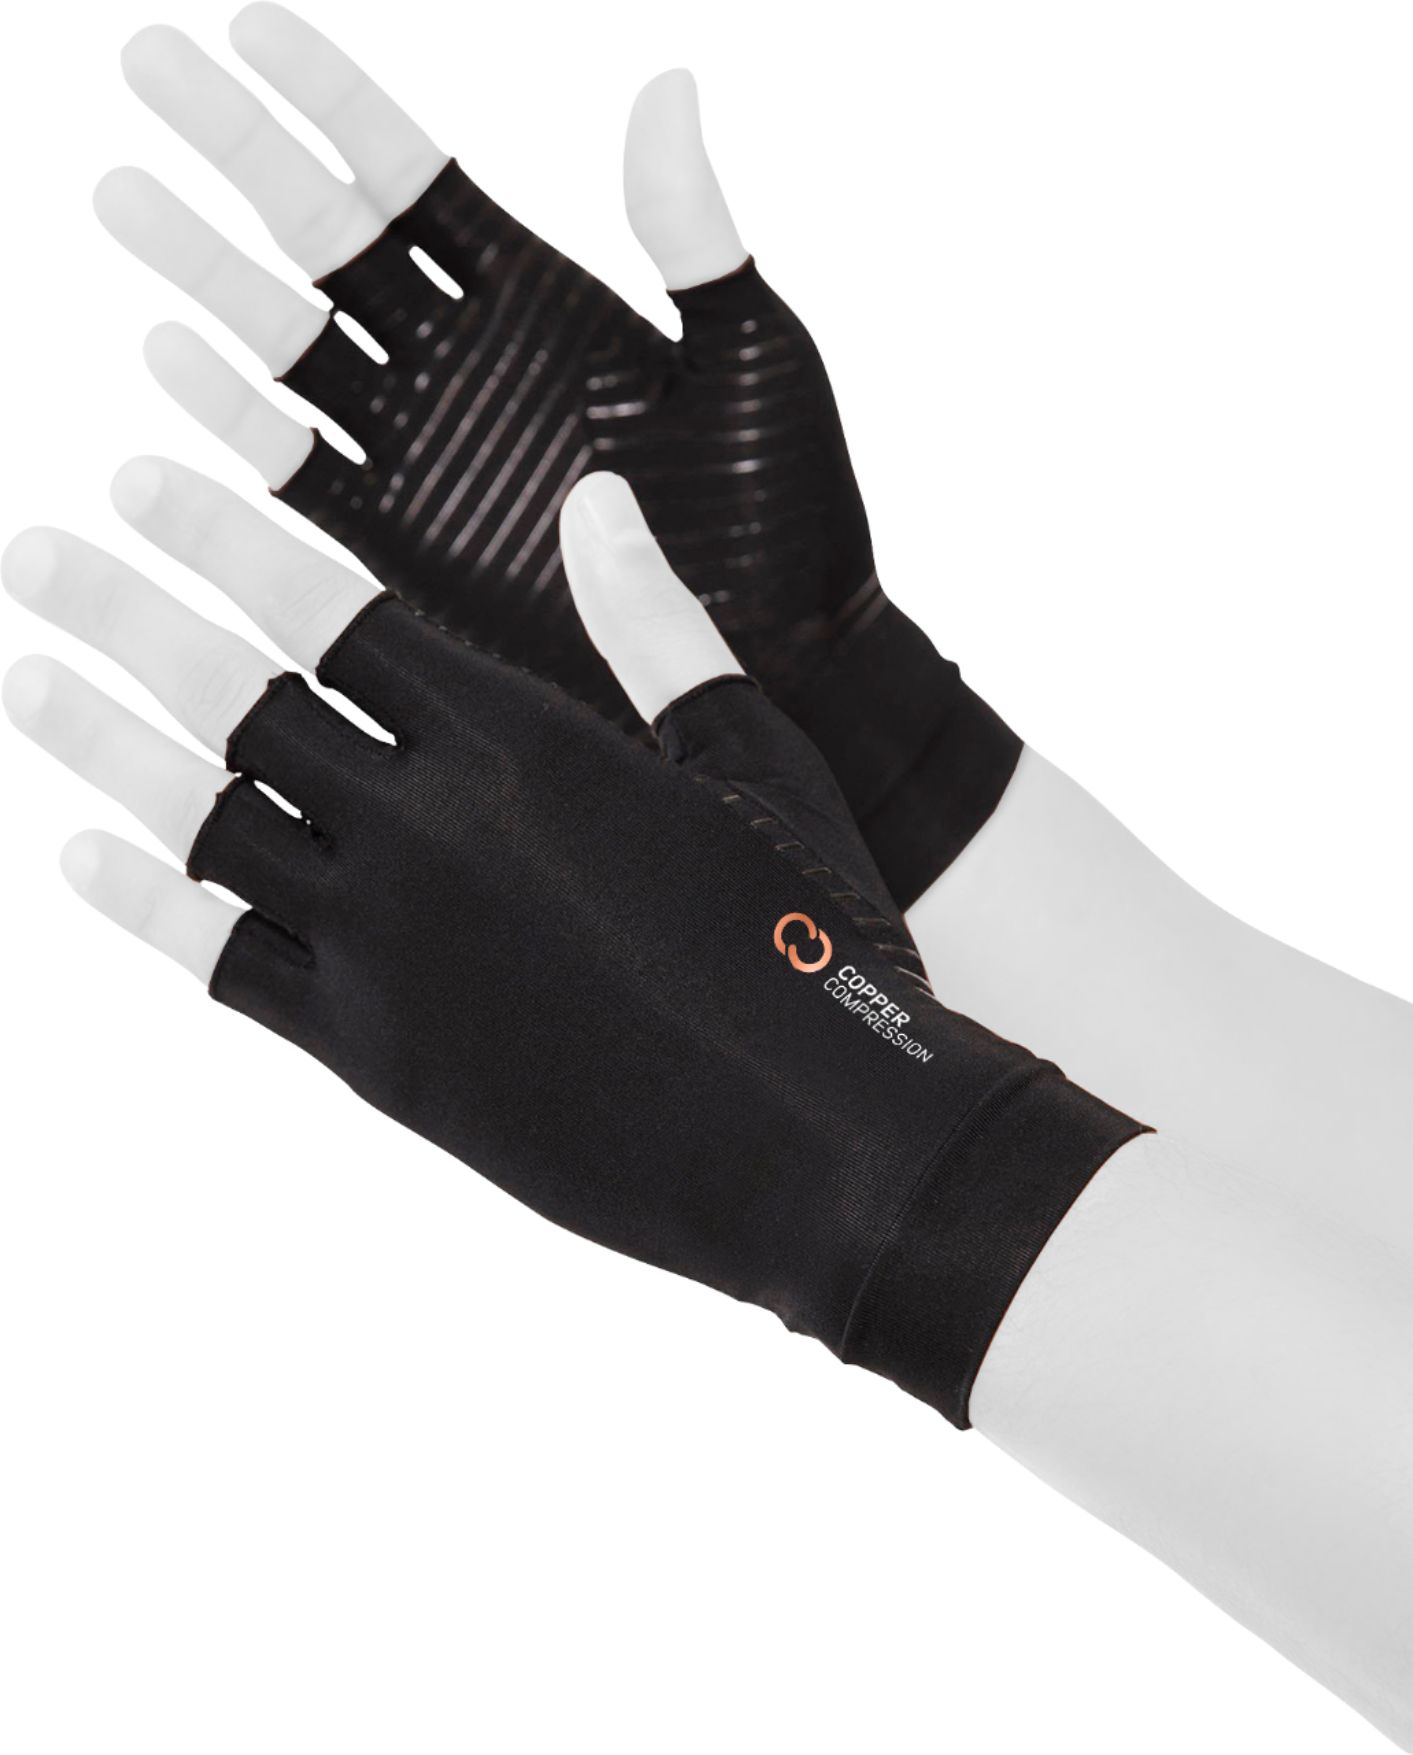 Copper Compression Copper Infused Arthritis Half Finger Gloves Small/Medium  BS3 CCCHFG/BS3 - Best Buy